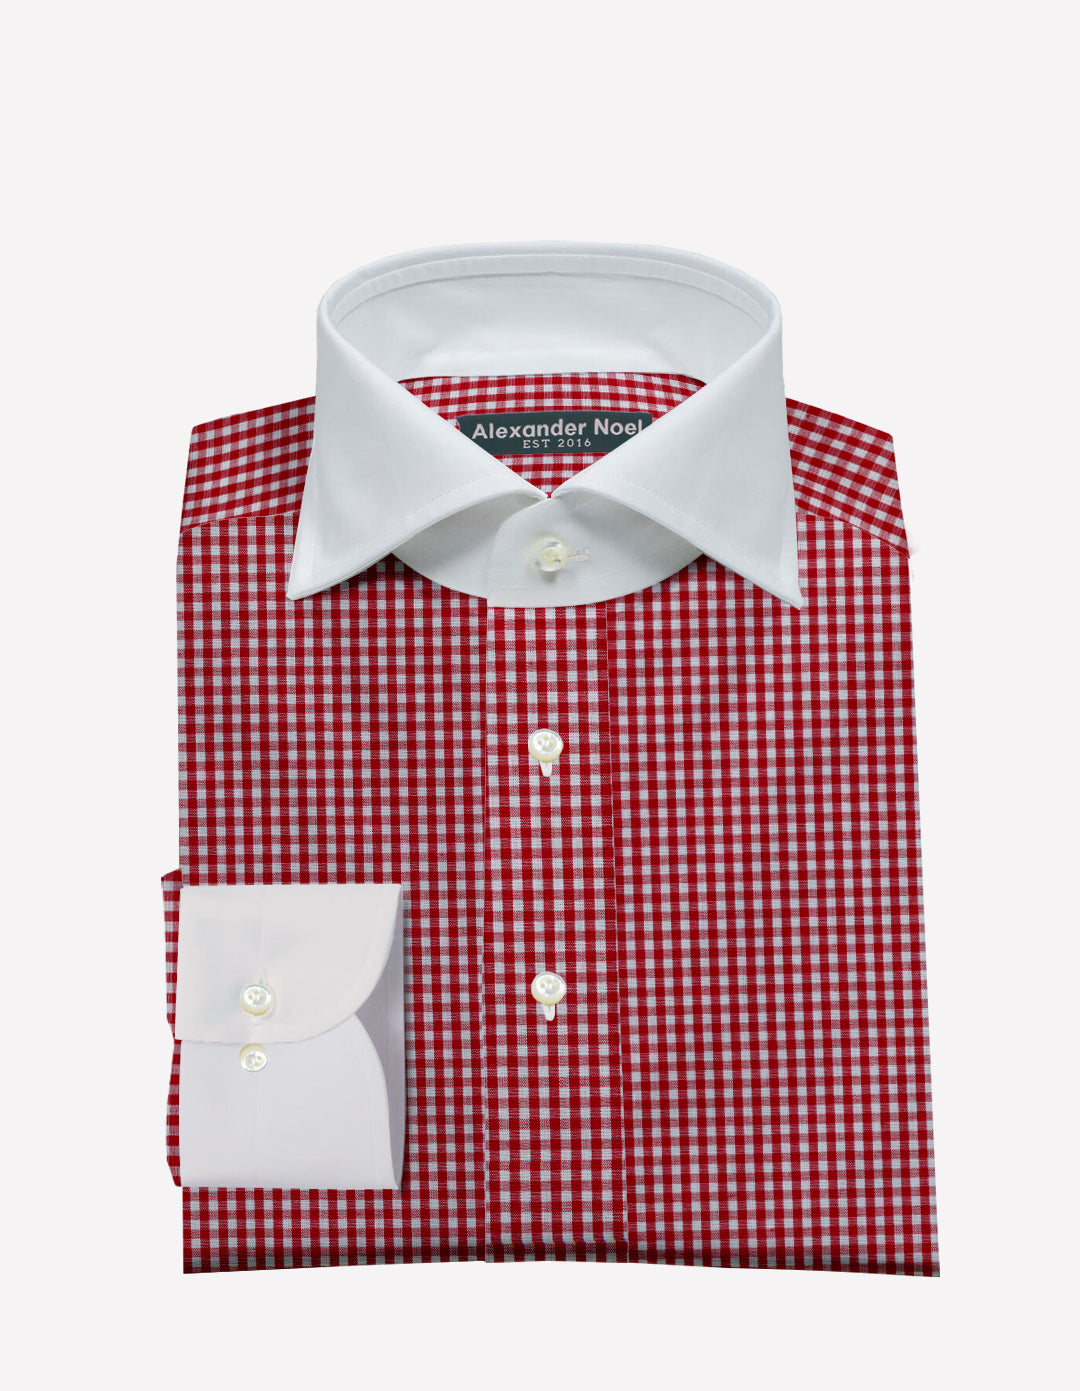 Red Gingham with White Collar and Cuff